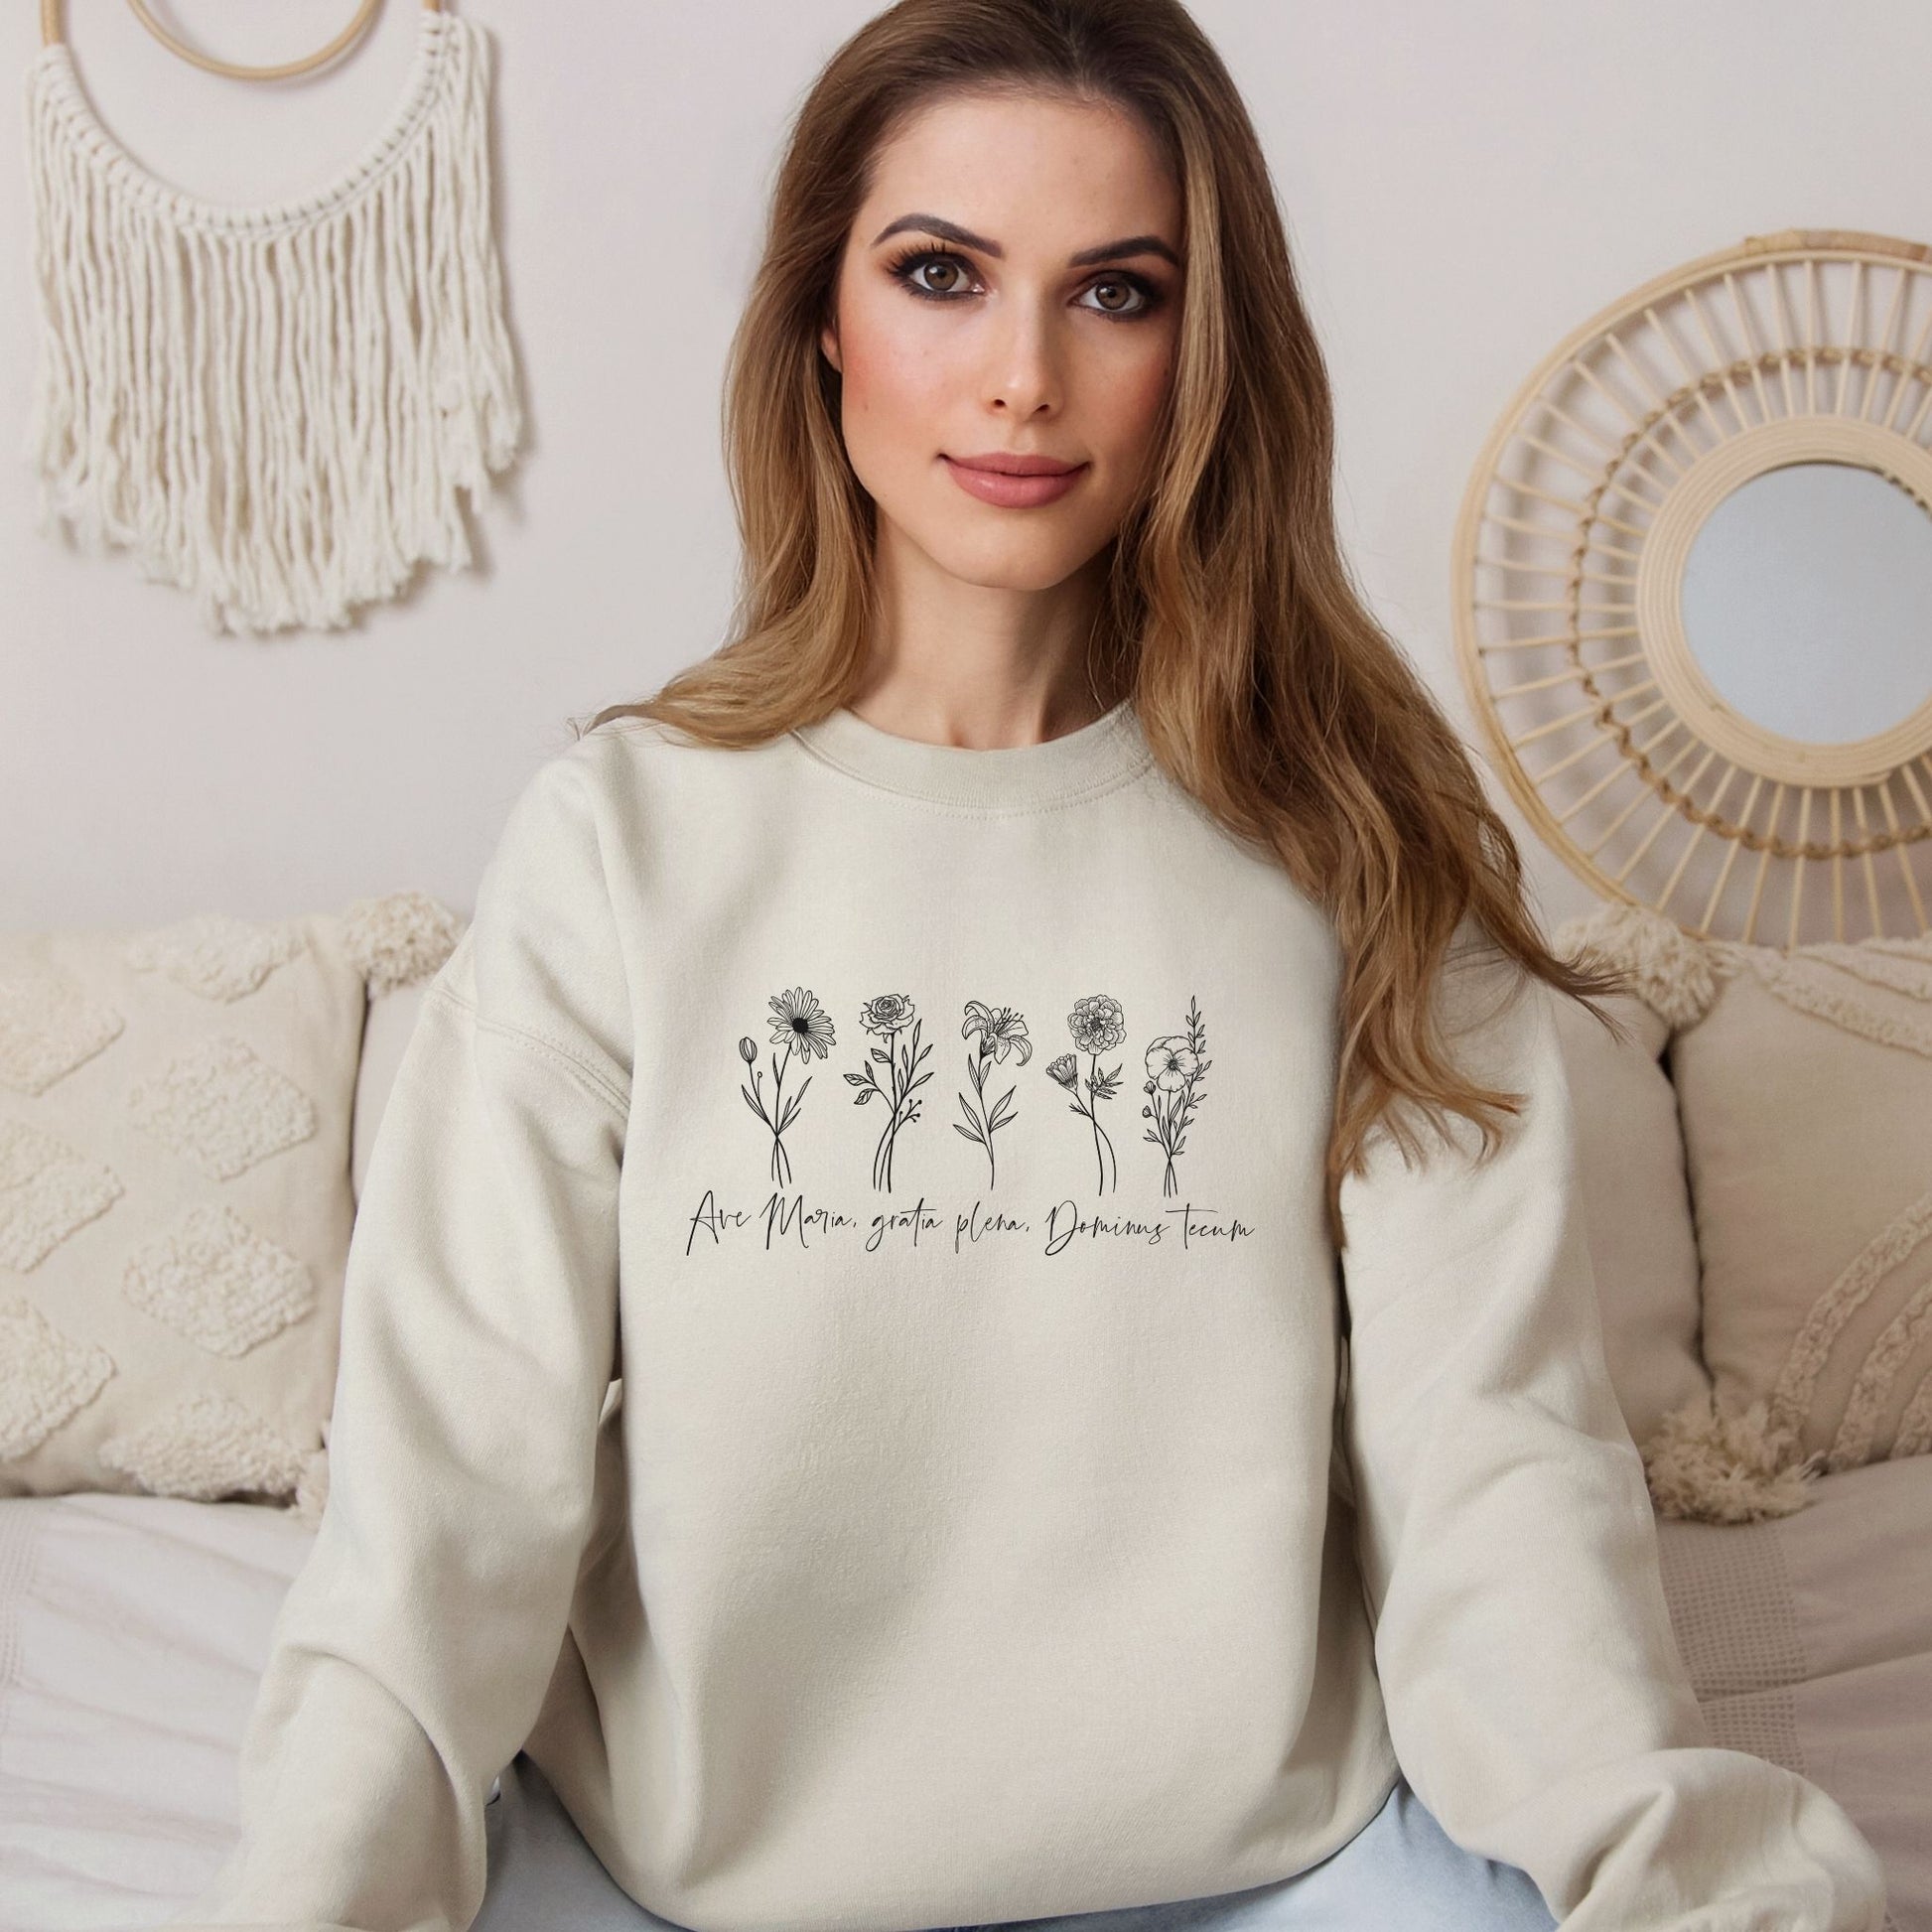 a woman sitting on a bed wearing a sweater with flowers on it